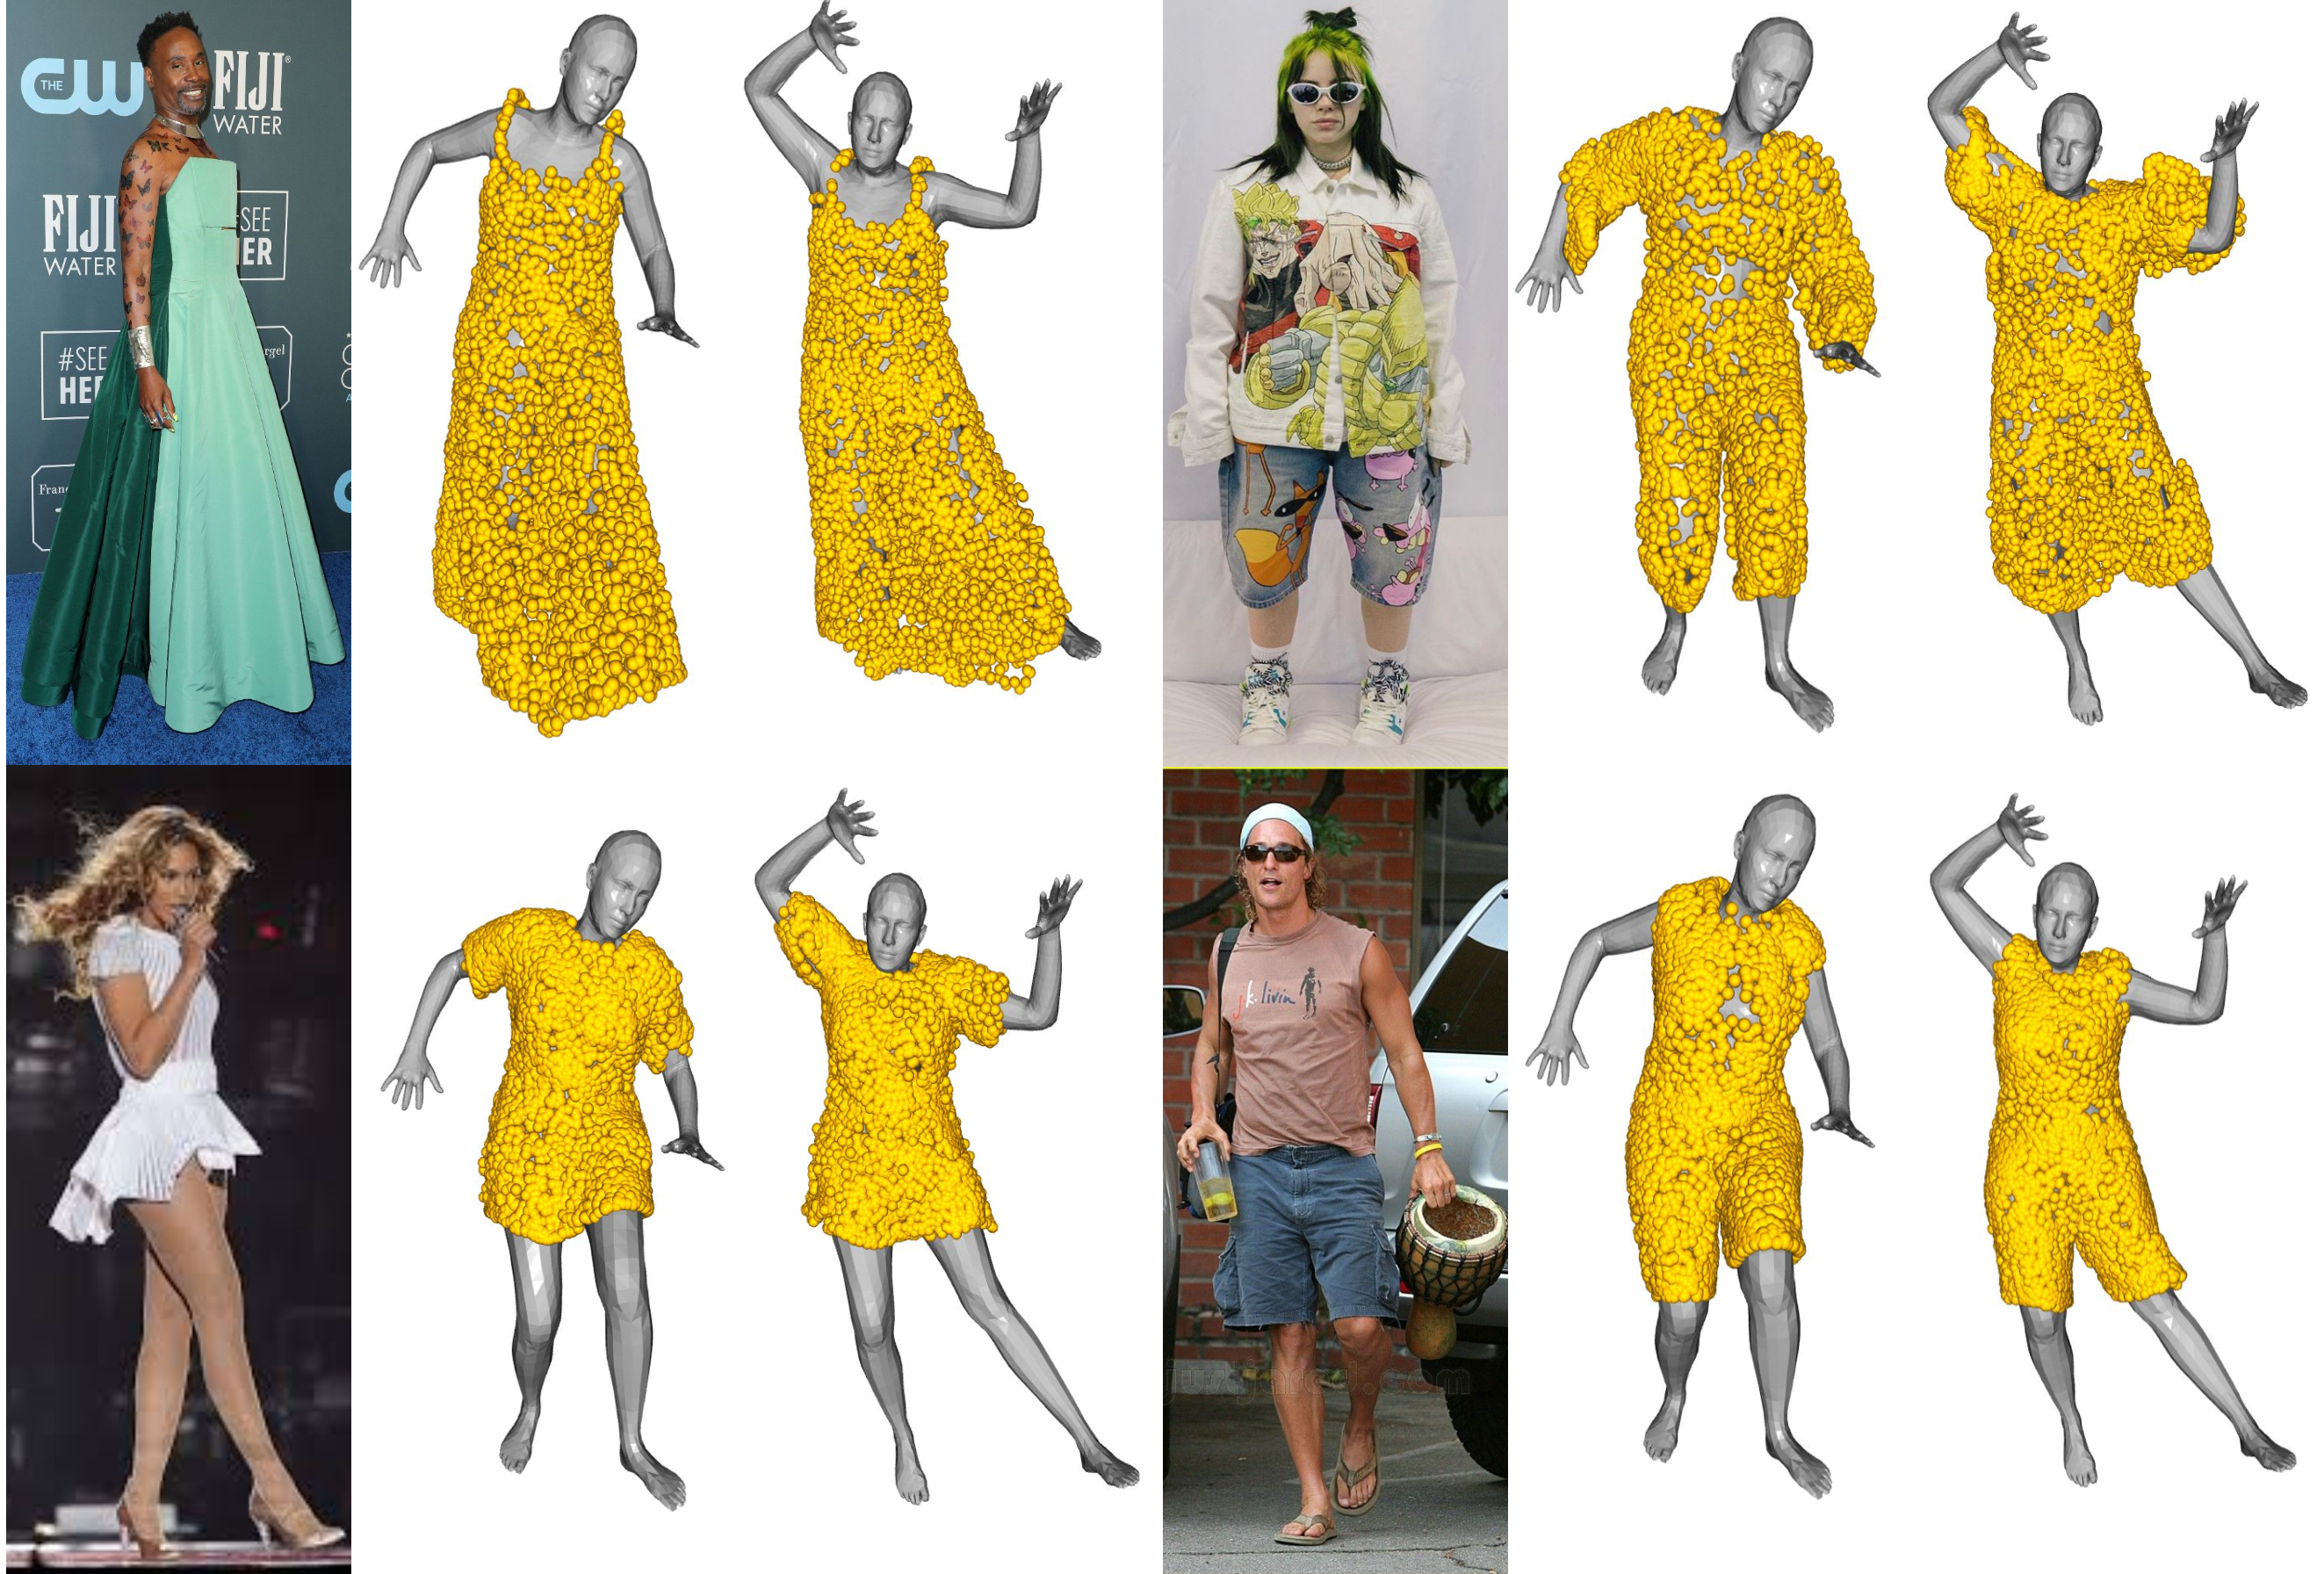 Outfits modeled from single in-the-wild images using our model are retargeted to novel poses